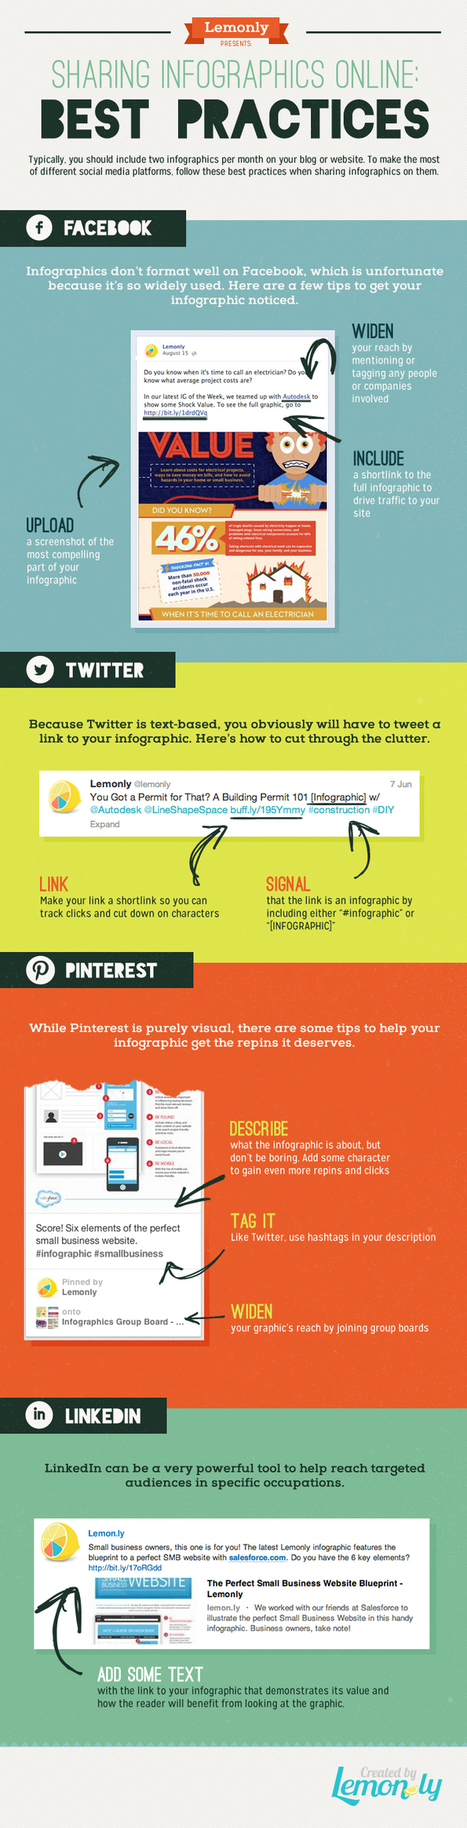 #Social Media Best Practices for #Infographics | Business Improvement and Social media | Scoop.it